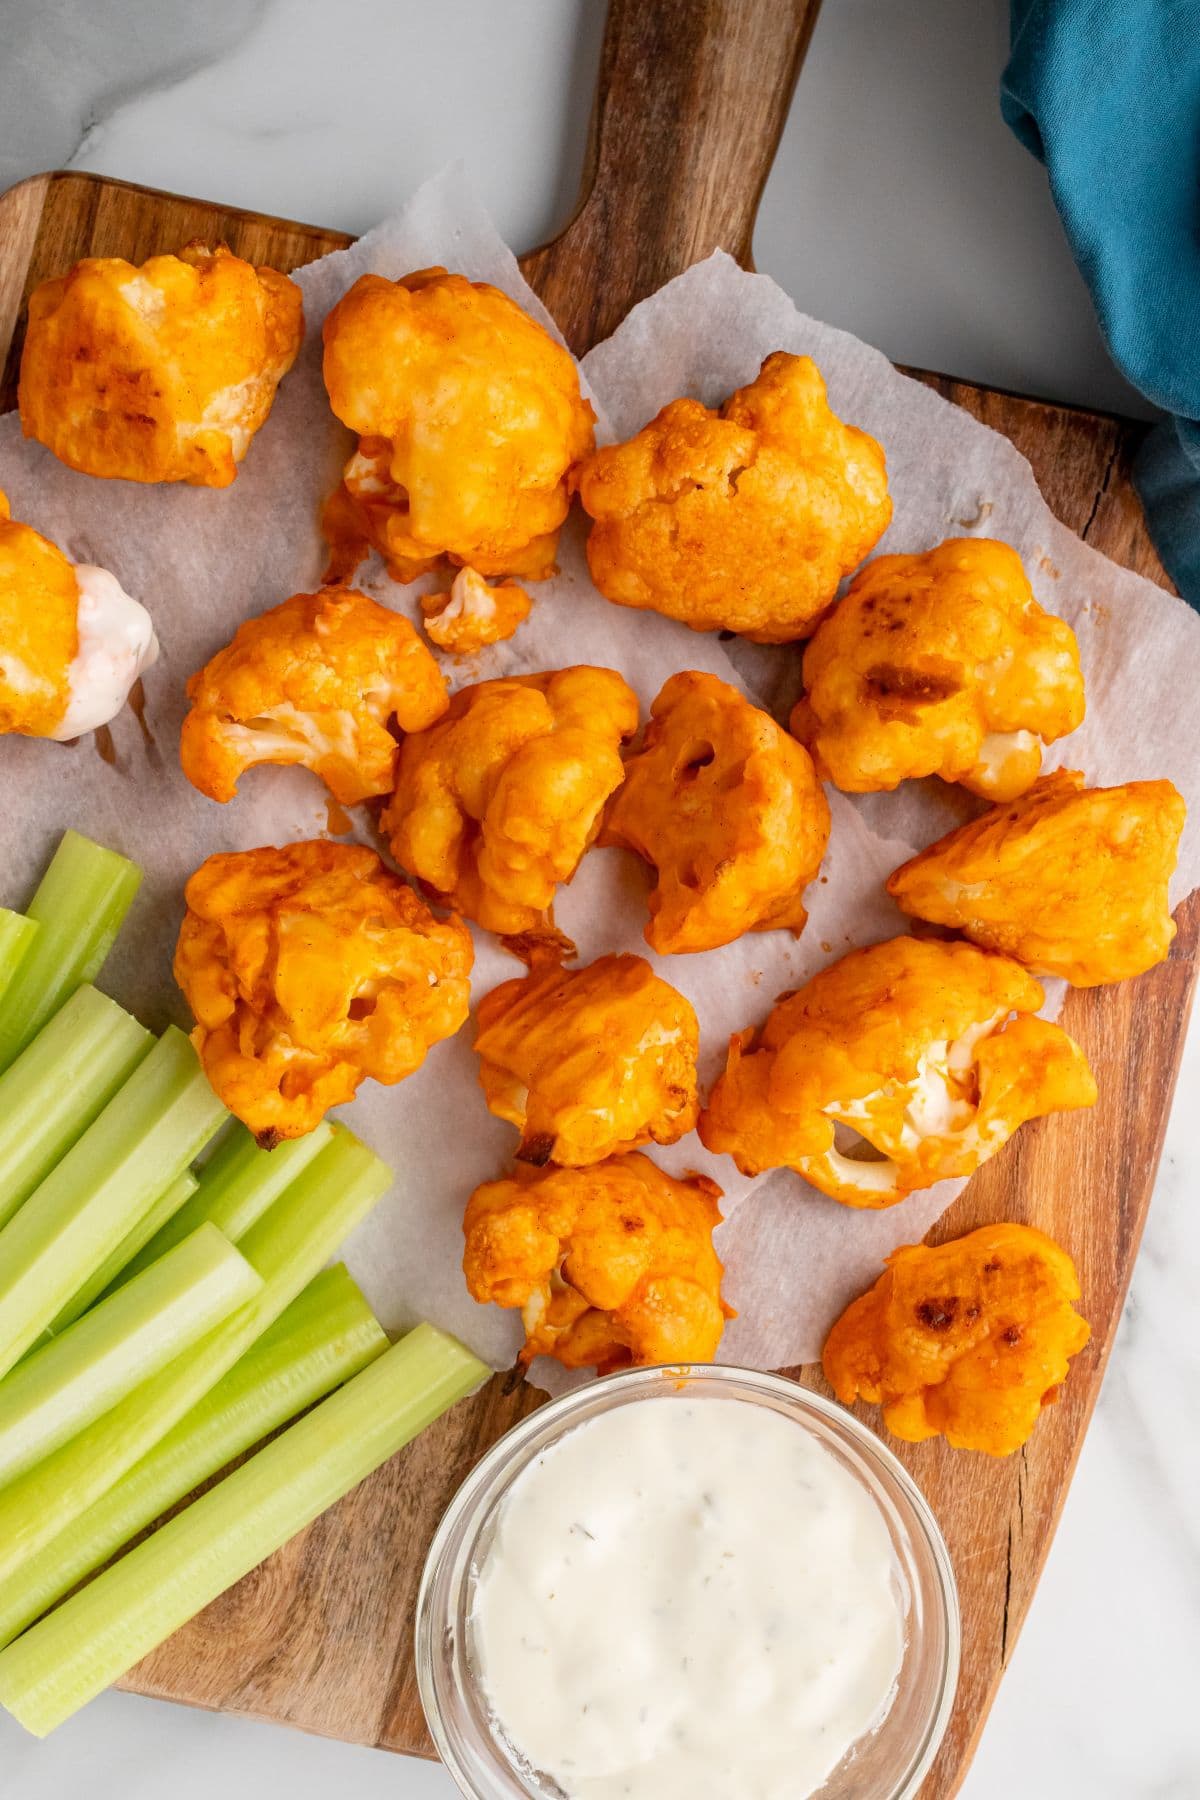 What Are Cauliflower Wings